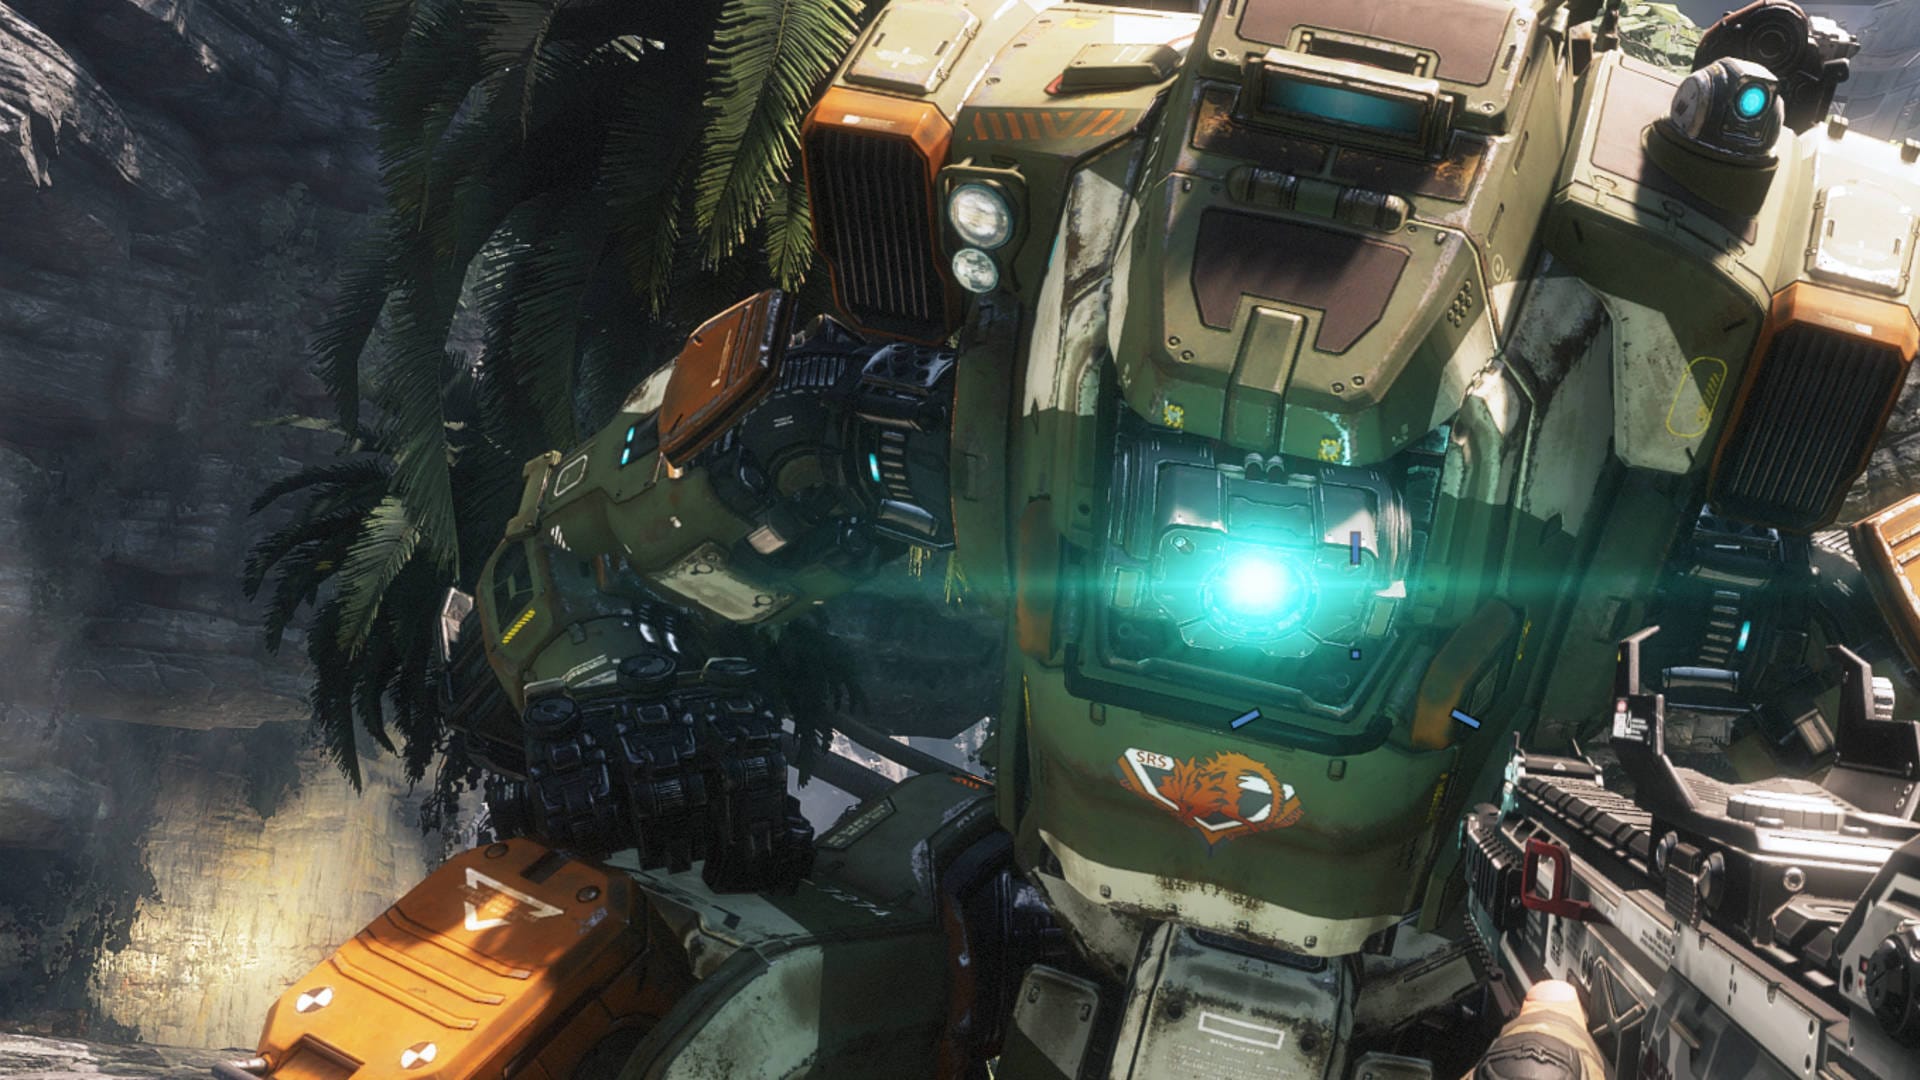 Titanfall 2' release date PS4, Xbox One: Game tipped to launch before end  of 2016